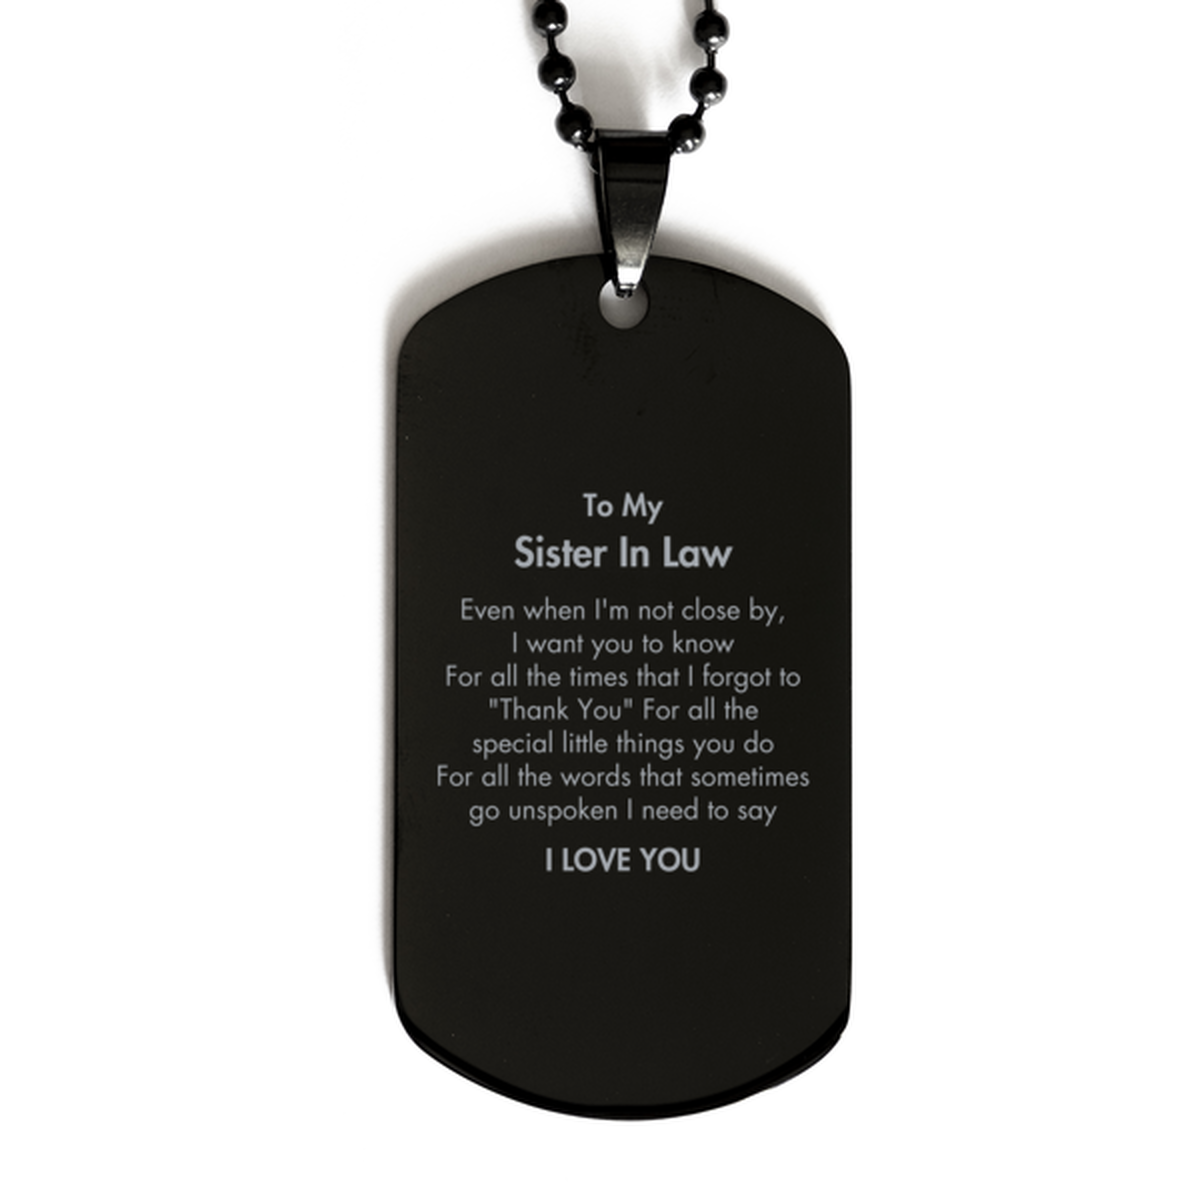 Thank You Gifts for Sister In Law, Keepsake Black Dog Tag Gifts for Sister In Law Birthday Mother's day Father's Day Sister In Law For all the words That sometimes go unspoken I need to say I LOVE YOU